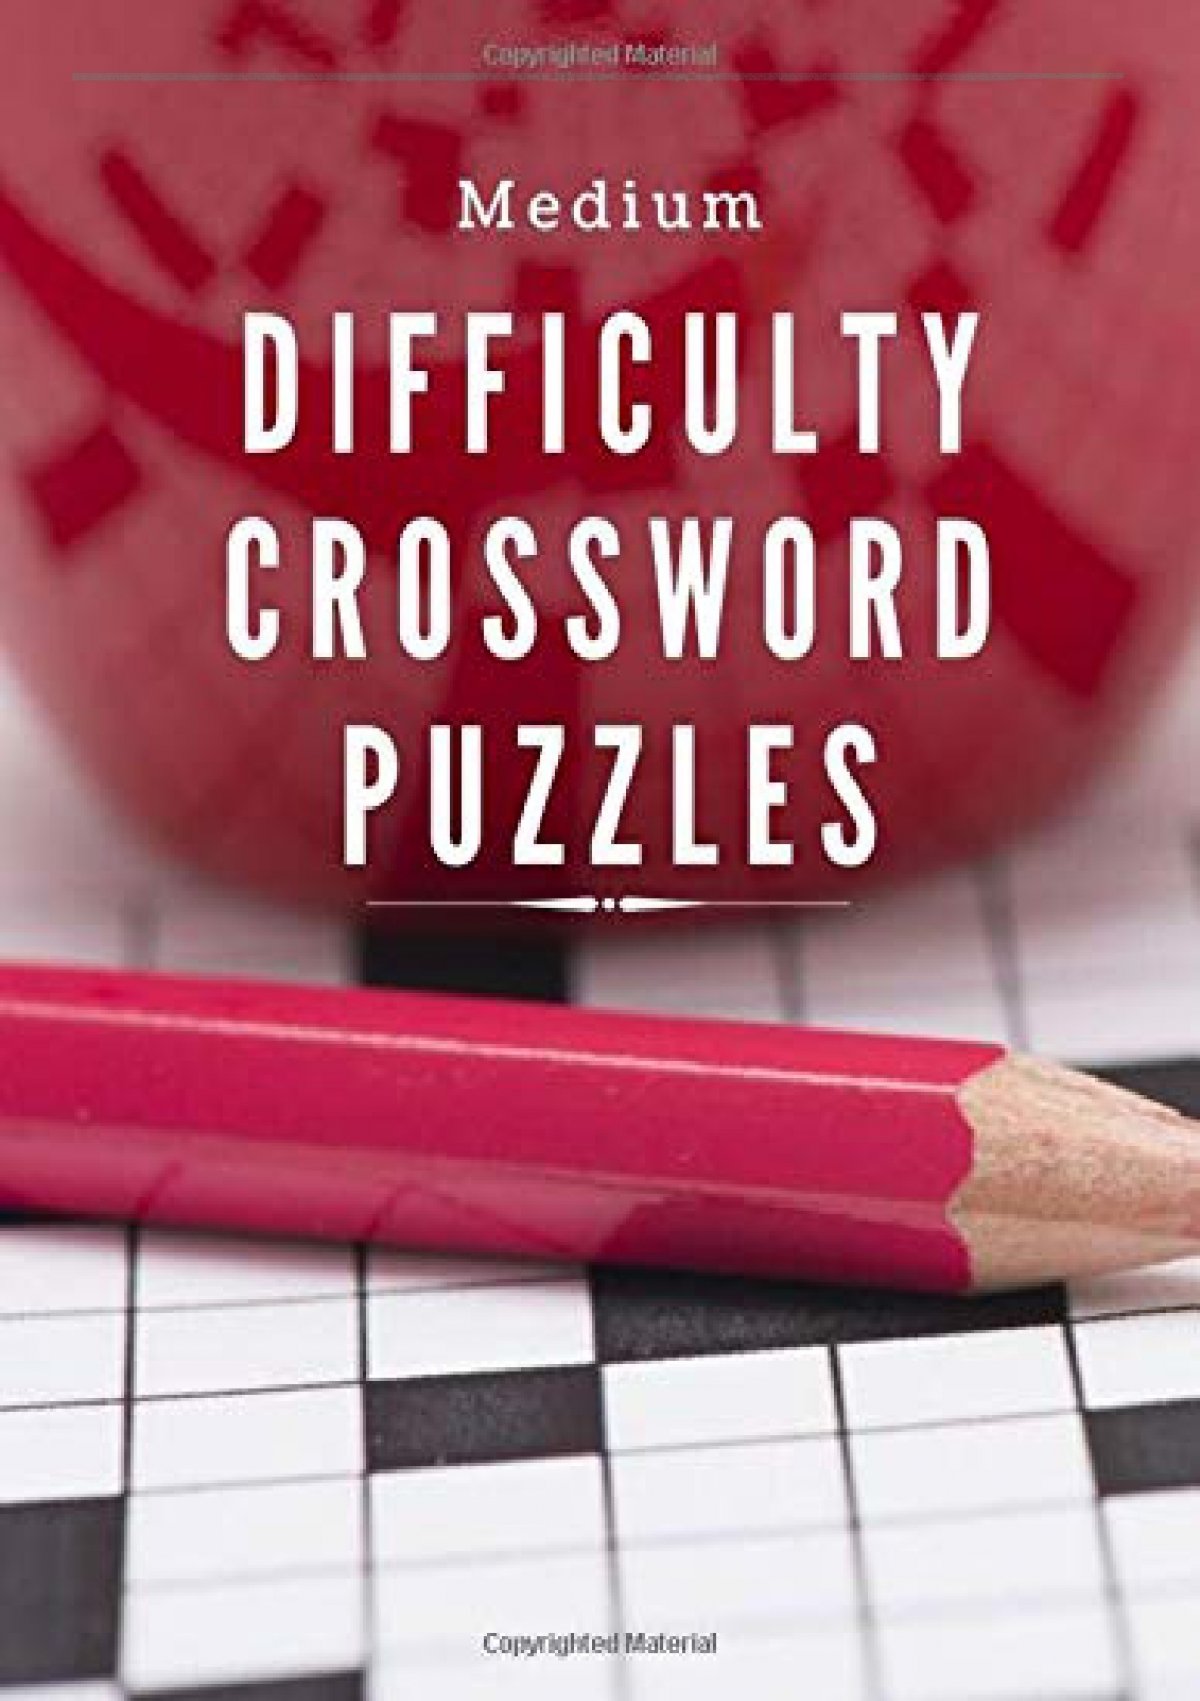 Pdf Medium Difficulty Crossword Puzzles Crossword Fill In Puzzle Books The Week Rest Easy Crossword Puzzles For Adults Word Search And Crossword Puzzle Puzzles Unique Crossword Puzzle Series Ipad